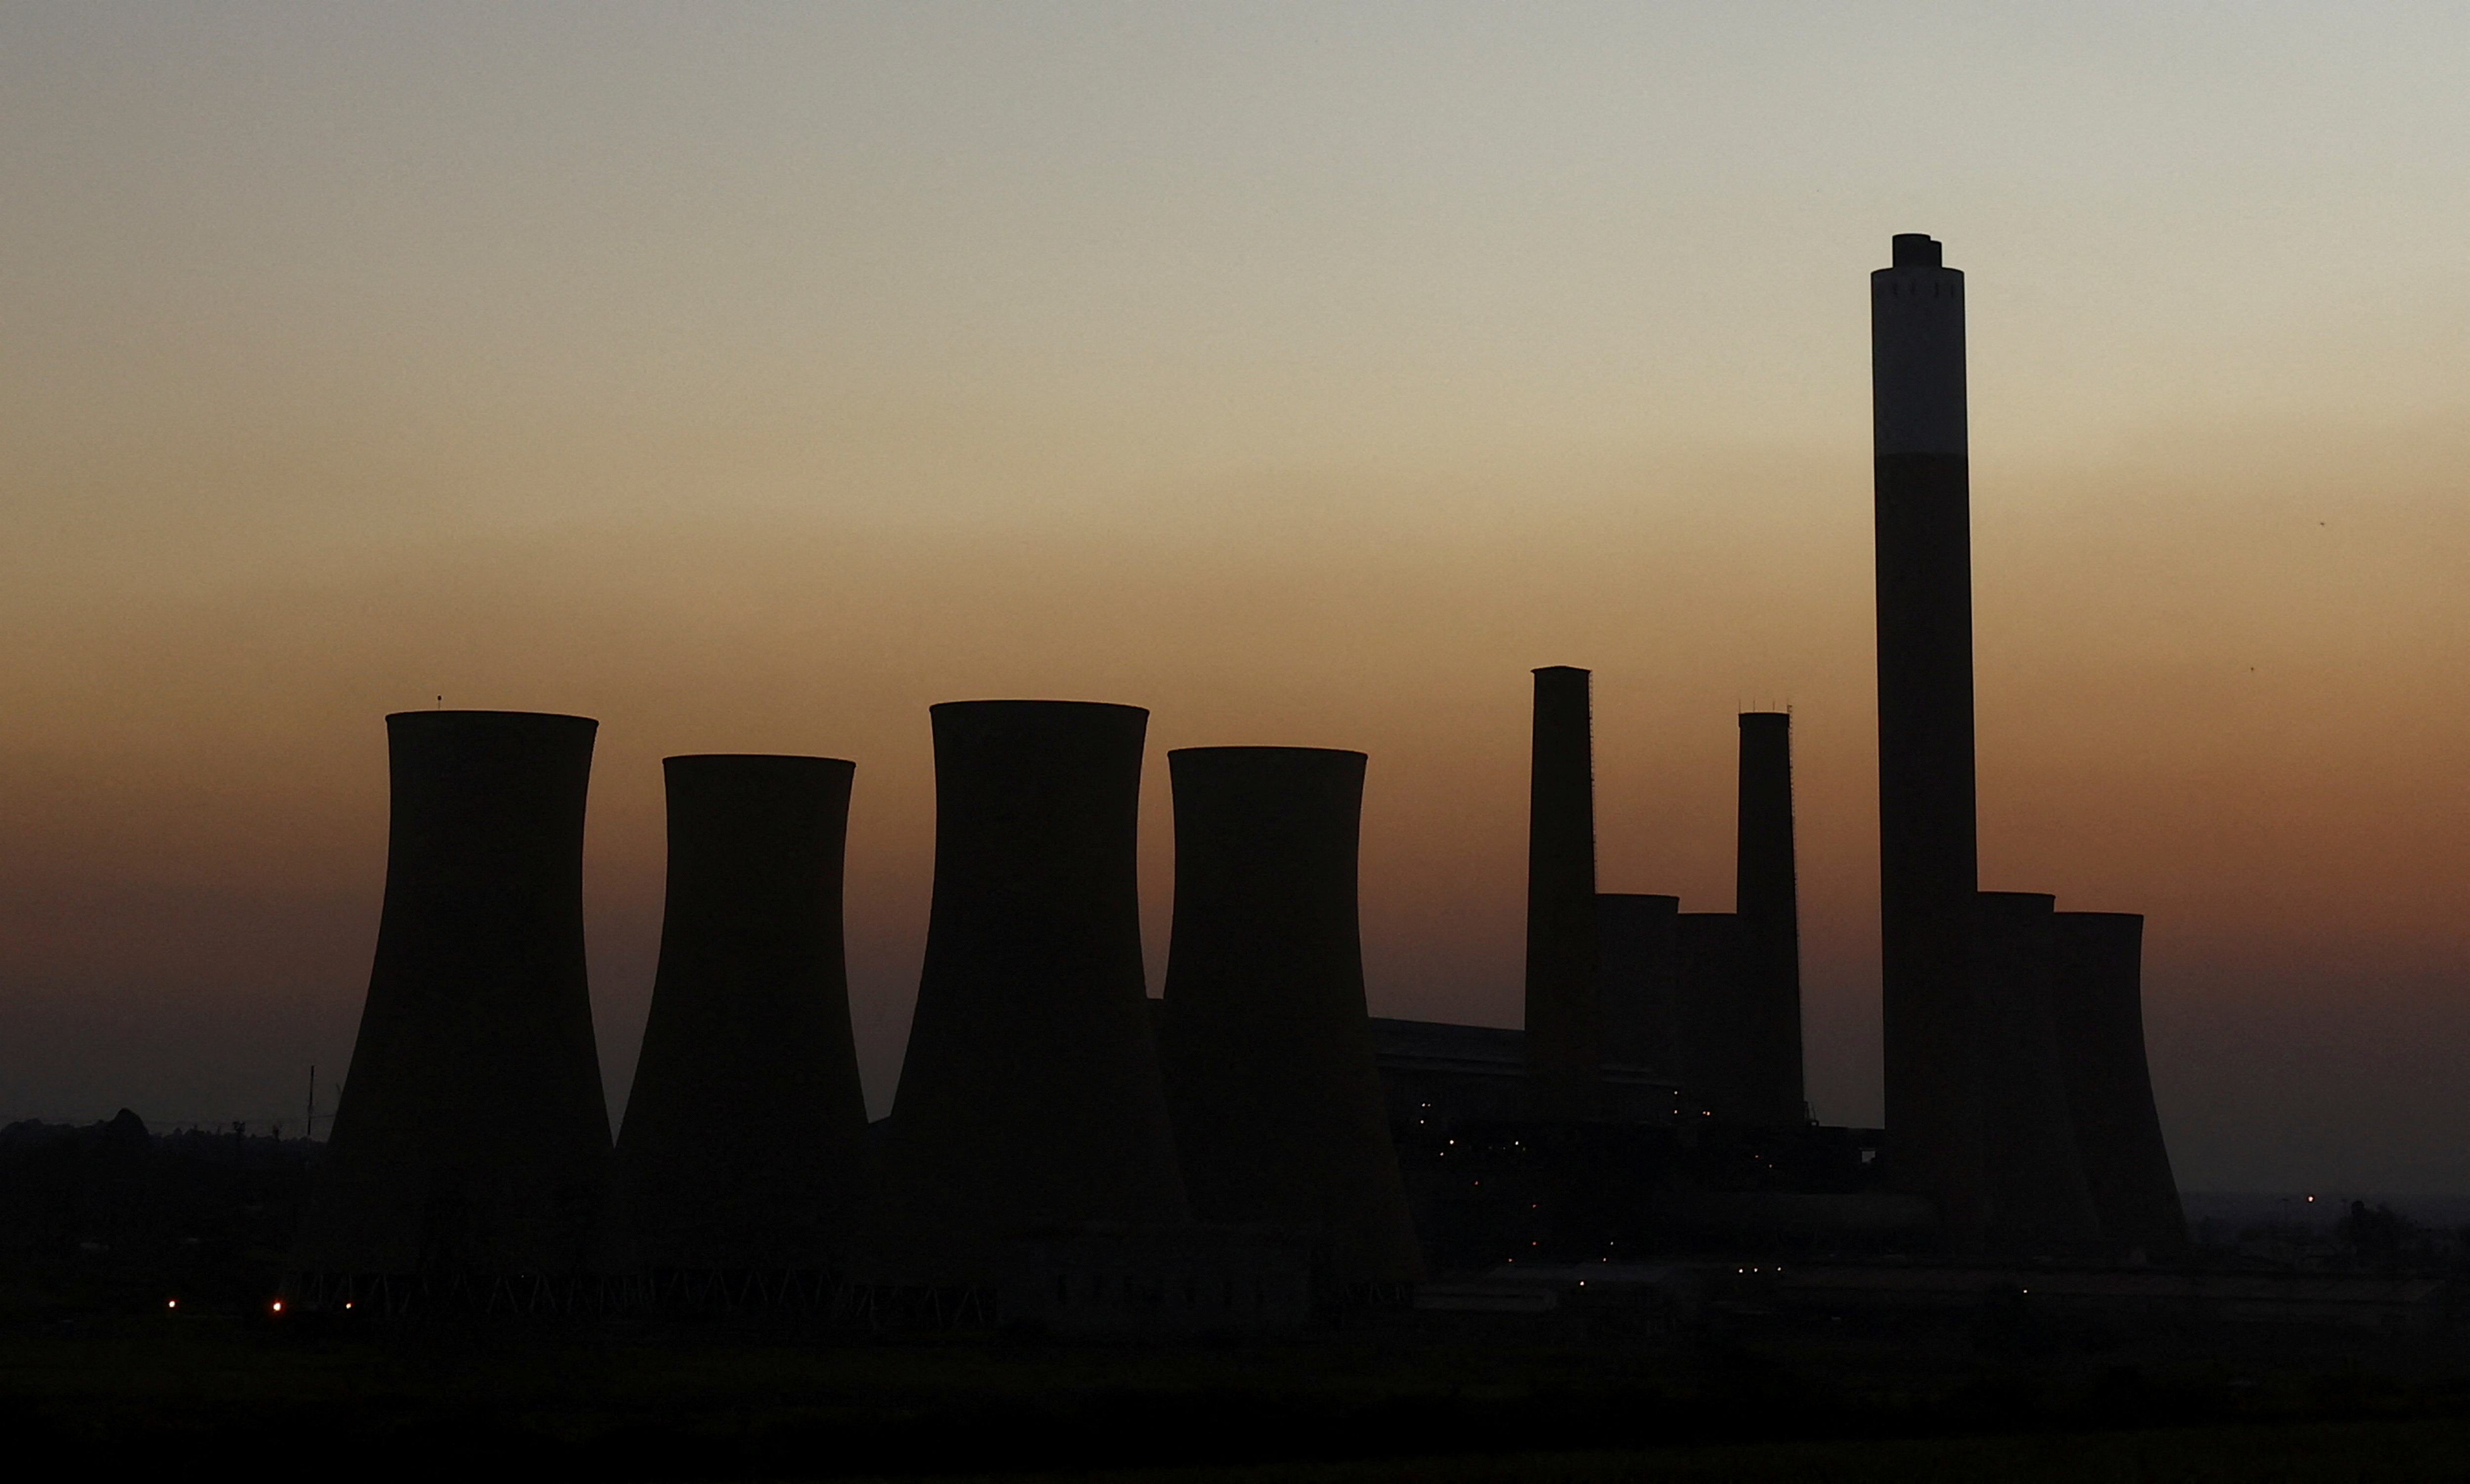 South Africa's ANC walks political tight rope over coal plant shutdowns